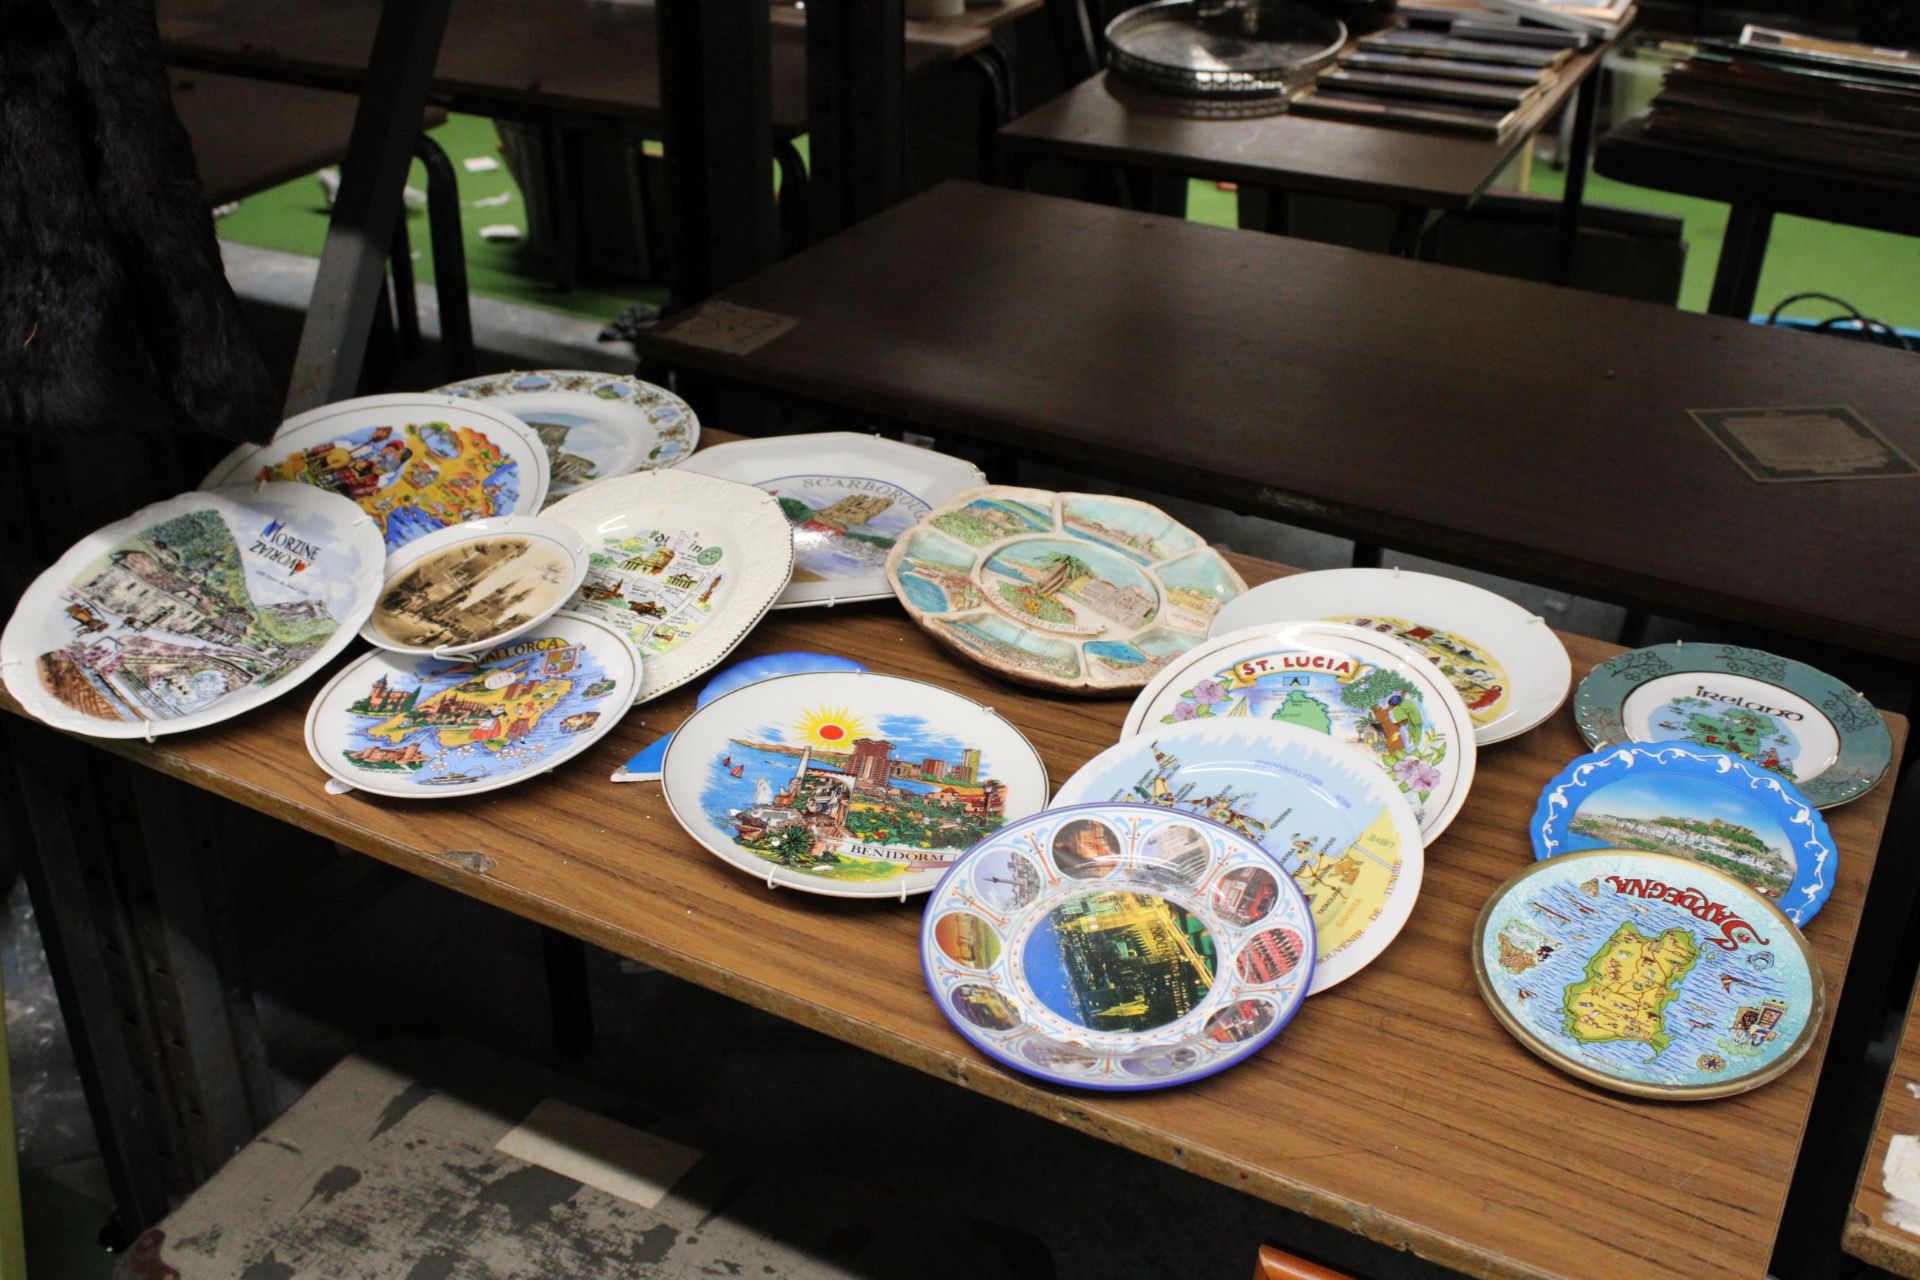 A COLLECTION OF TOURIST CABINET PLATES - 17 IN TOTAL